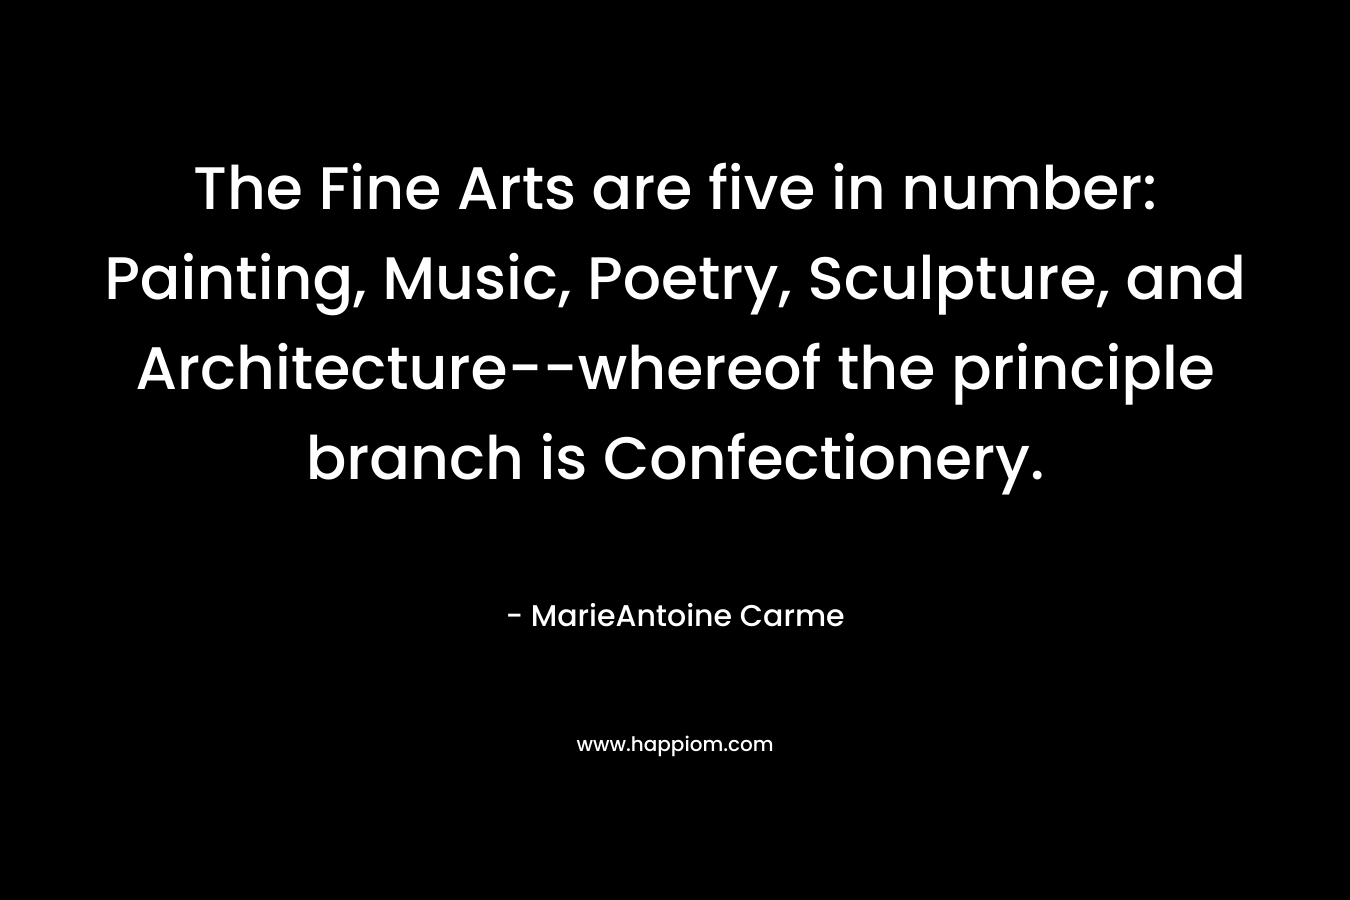 The Fine Arts are five in number: Painting, Music, Poetry, Sculpture, and Architecture–whereof the principle branch is Confectionery. – MarieAntoine Carme